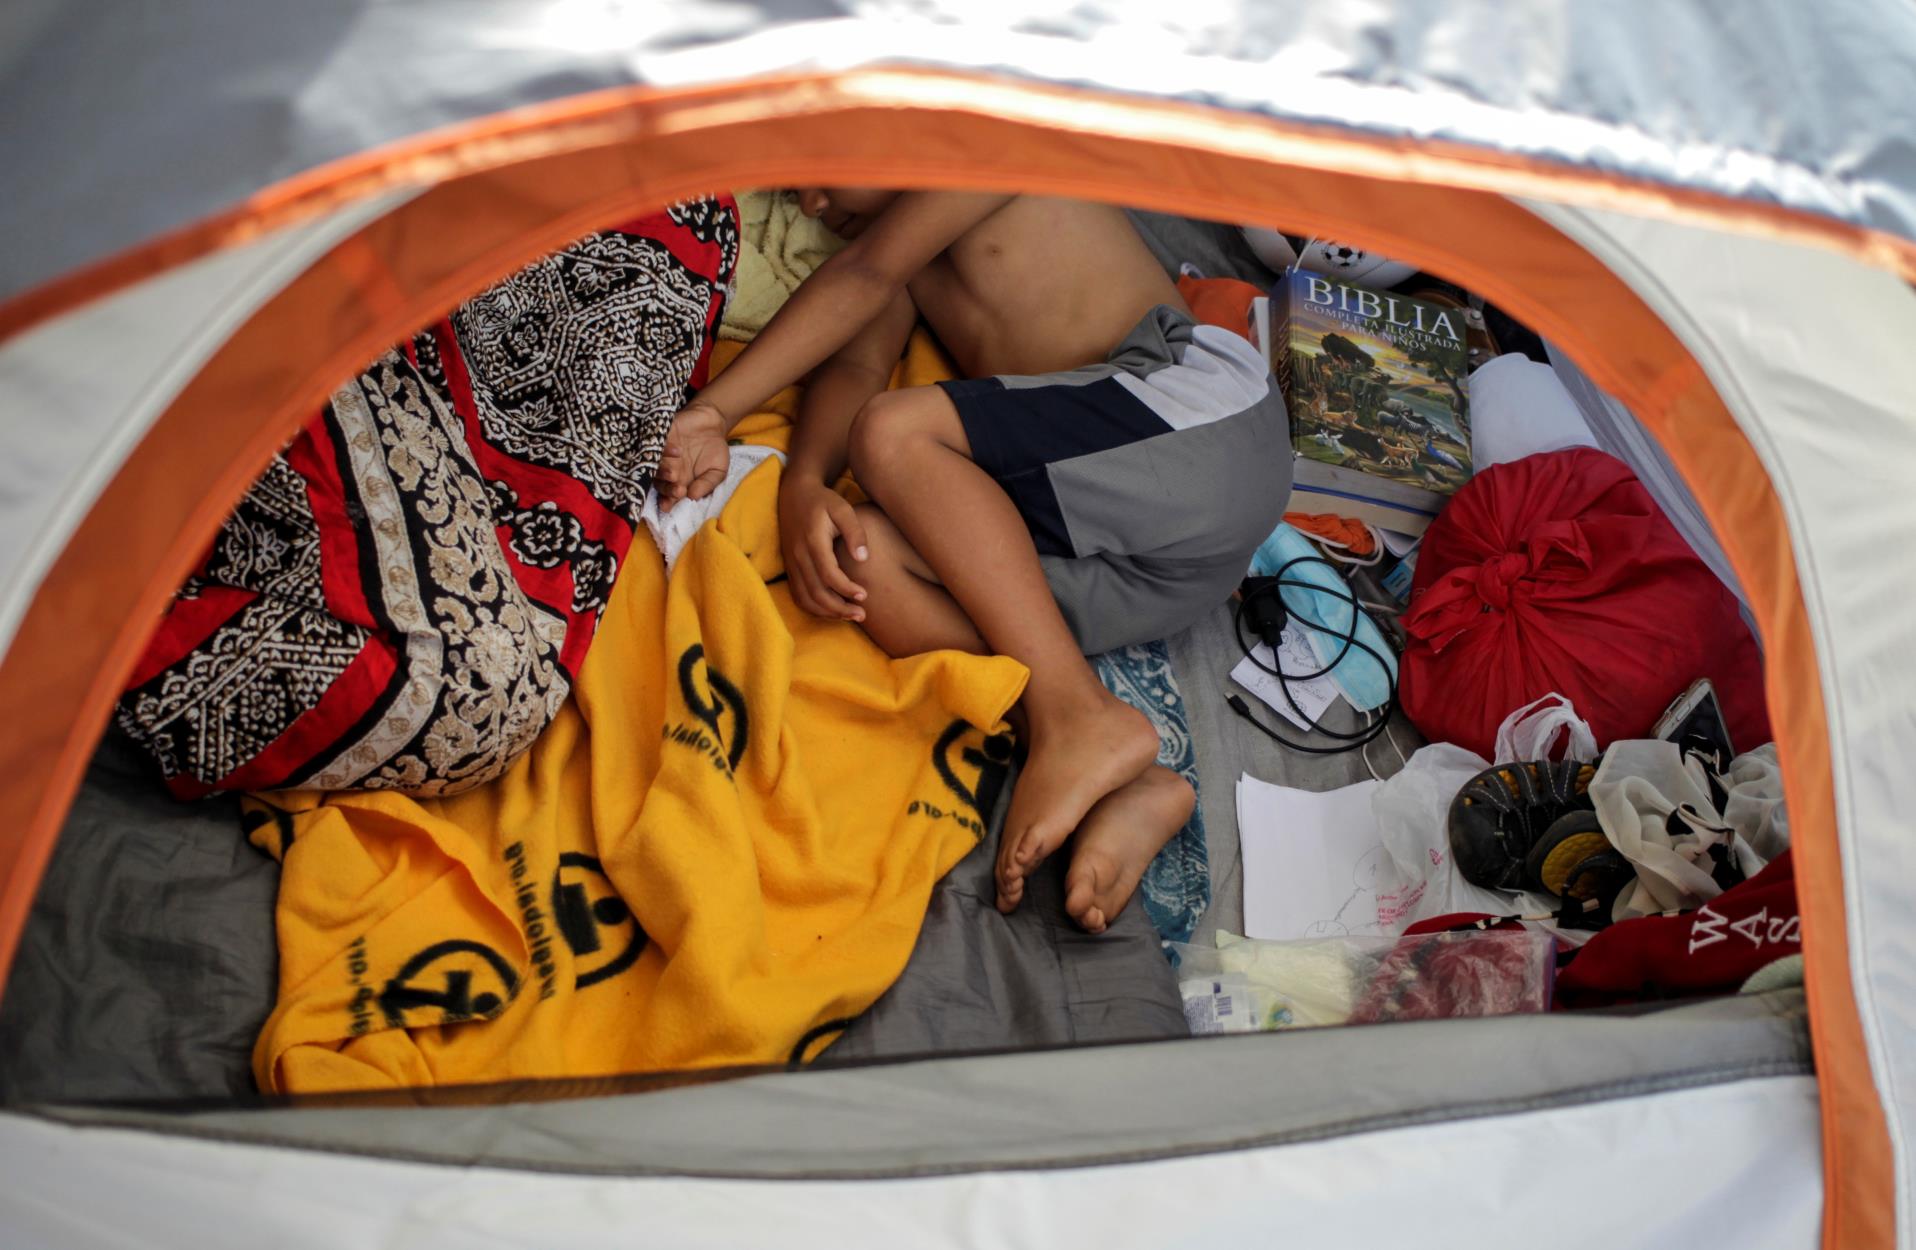 An asylum-seeking migrant youth, who was apprehended and returned to Mexico under Title 42 after crossing the border from Mexico into the U.S., rests in a public square wher<em></em>e hundreds of migrants live in tents, in Reynosa, Mexico June 9, 2021. Picture taken June 9, 2021. REUTERS/Daniel Becerril